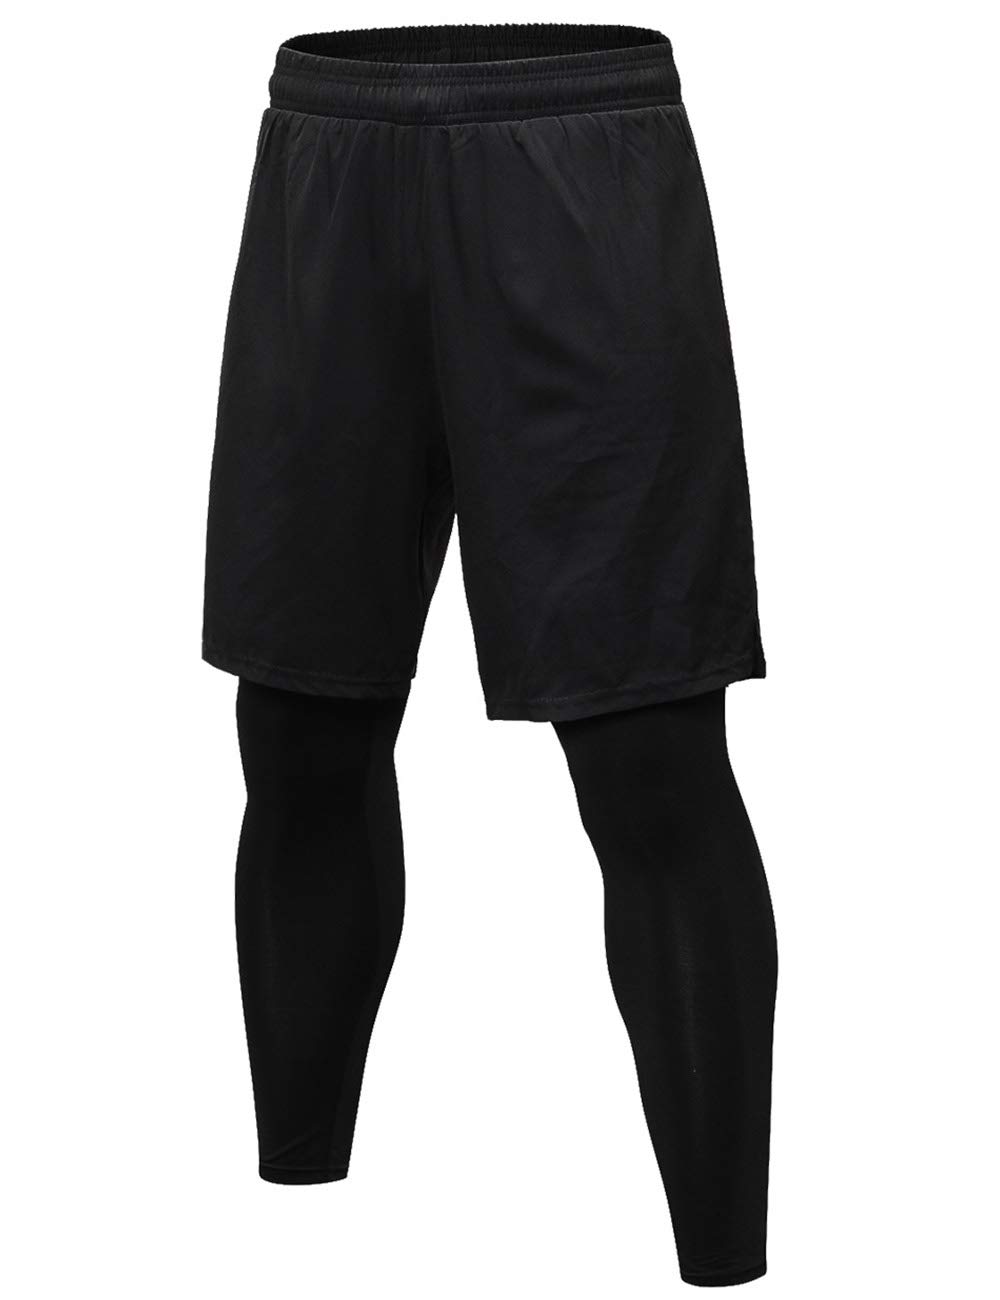 TOPTIE 2 in 1 Men's Active Running Shorts, Basketball Tights Pants Black  Large